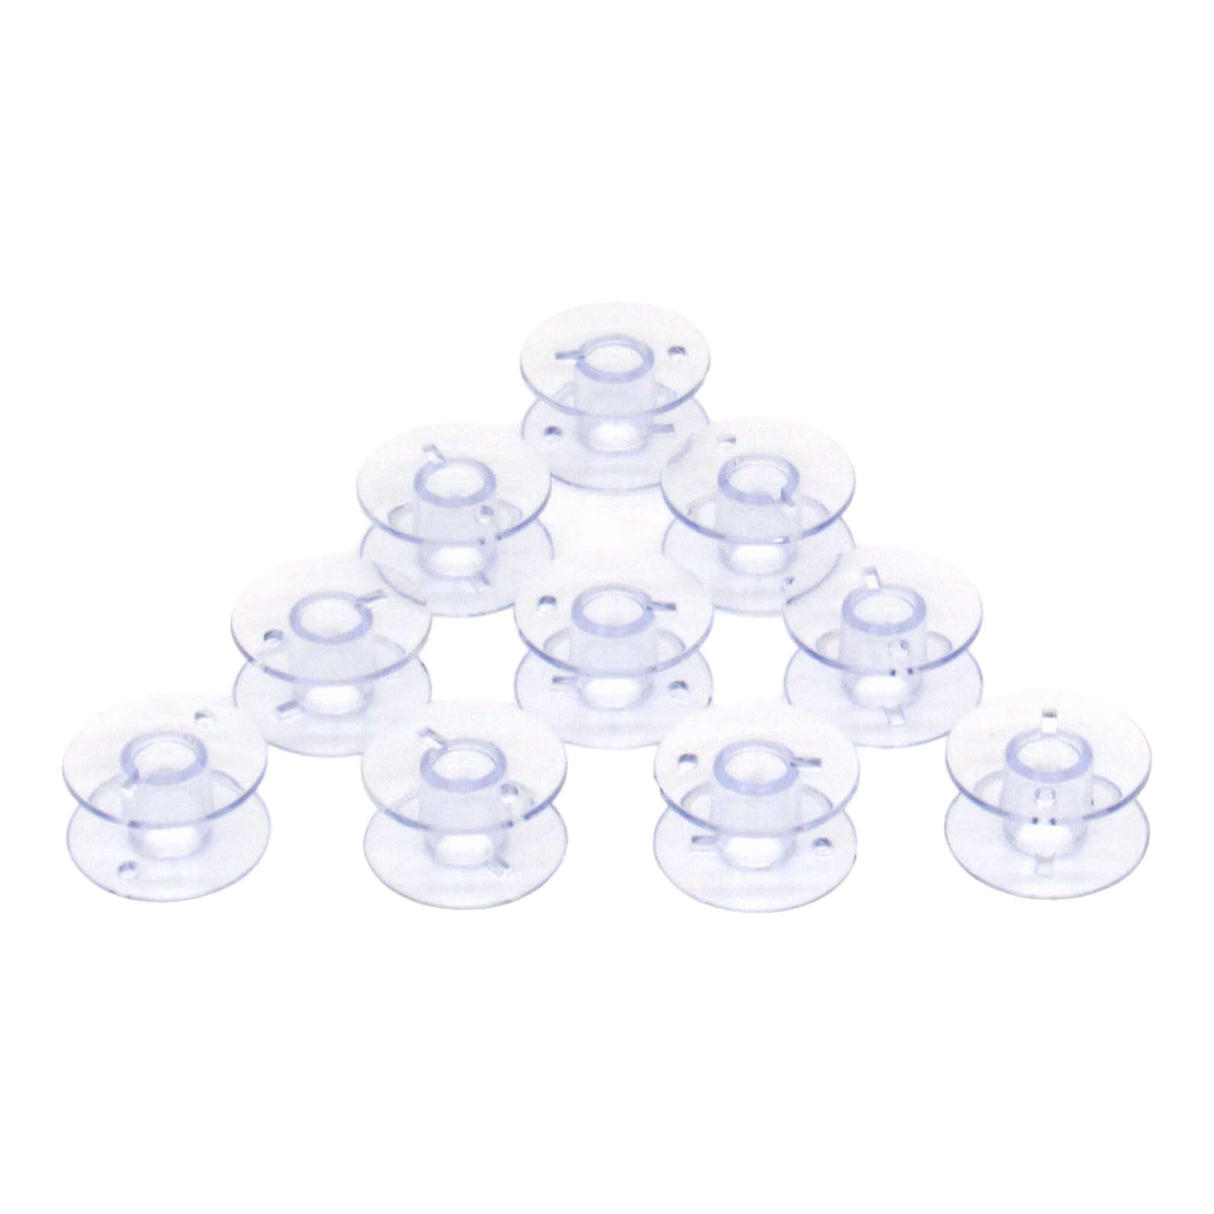 (10) Plastic Bobbins for Top Loading - Part # 102261103 - Central Michigan Sewing Supplies